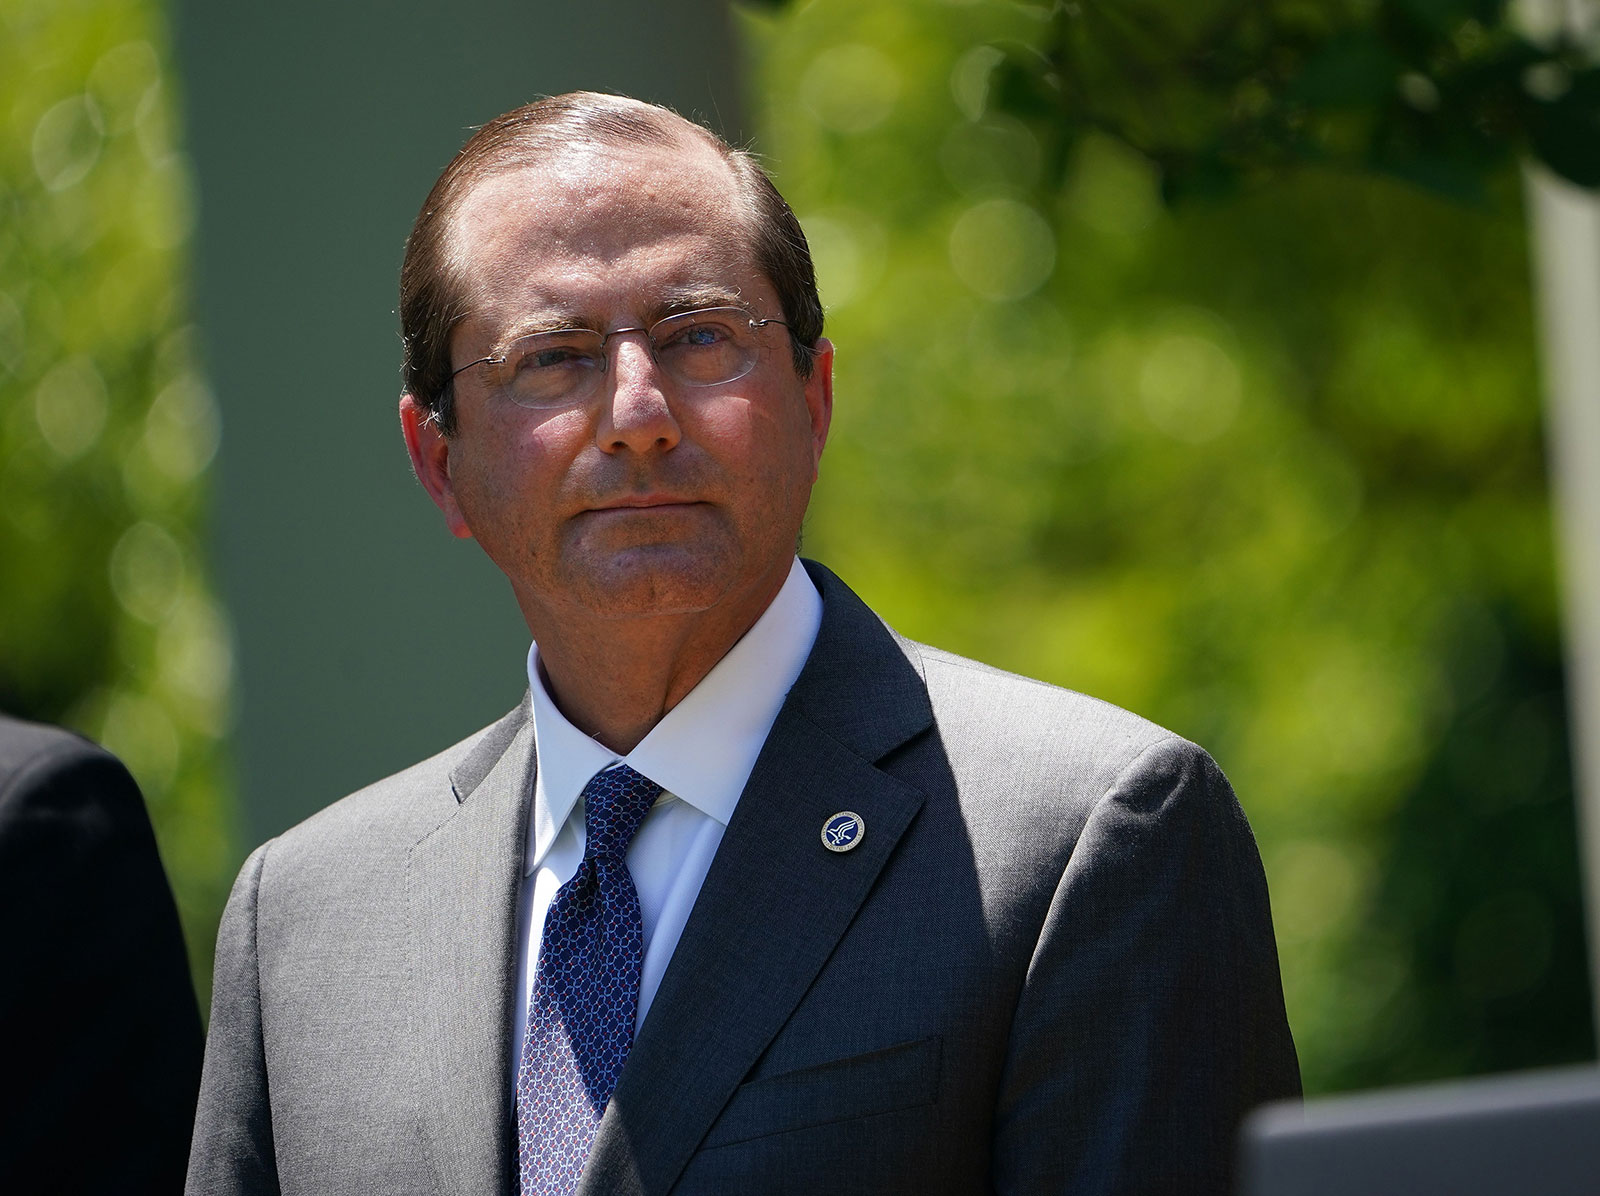 Health and Human Services Secretary Alex Azar listens during a vaccine development announcement from the Rose Garden of the White House on May 15.